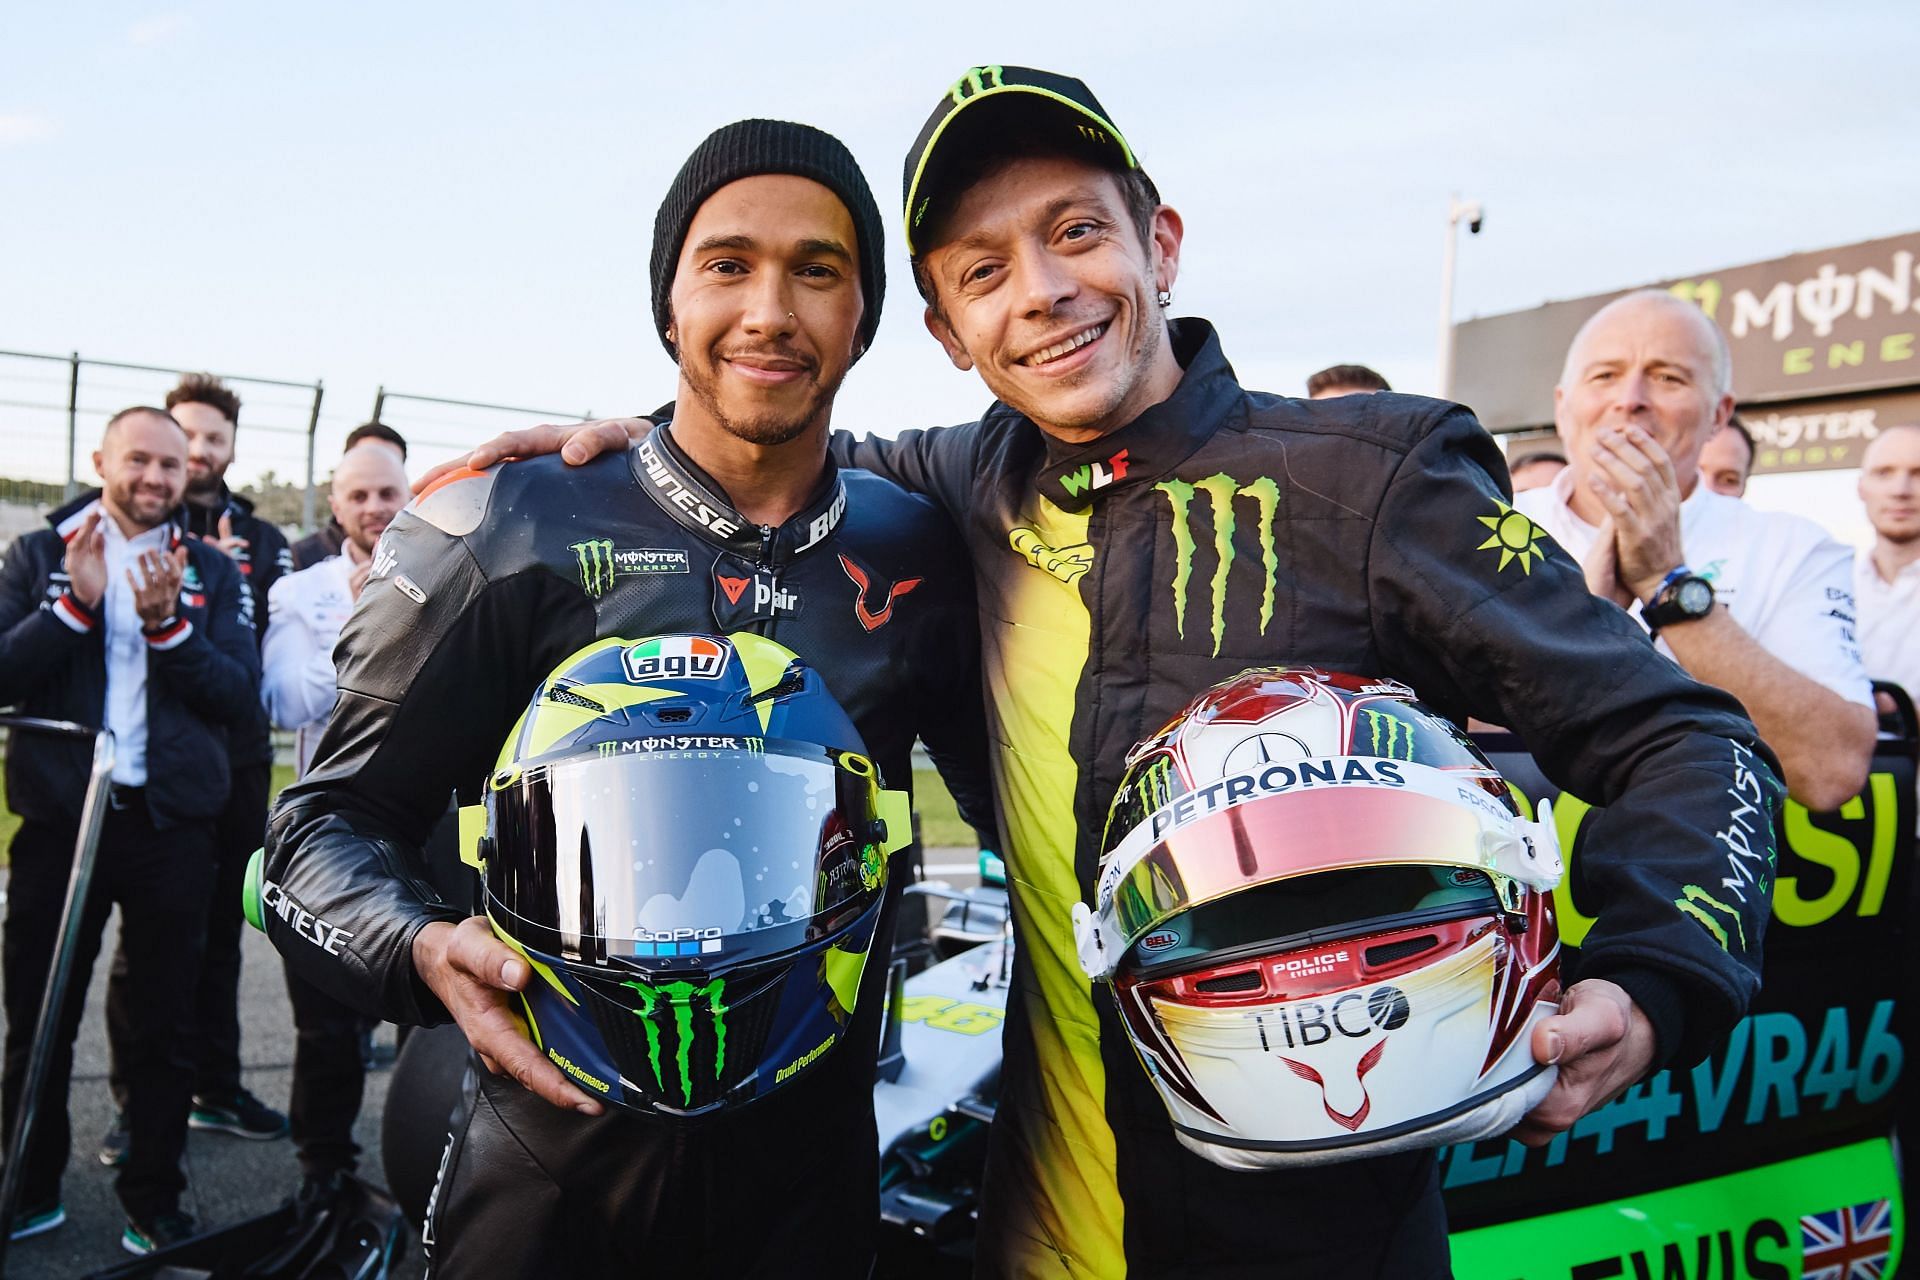 Lewis Hamilton s and Valentino Rossi swapped their respective helmets at the end of the #LH44VR46 test at Ricardo Tormo circuit of Valencia on December 09, 2019 in Valencia, Spain. Lewis Hamilton and Valentino Rossi swapped their respective machinery in an unprecedented test between two motorsport icons. (Photo by Guido De Bortoli/Getty Images for Monster Energy)